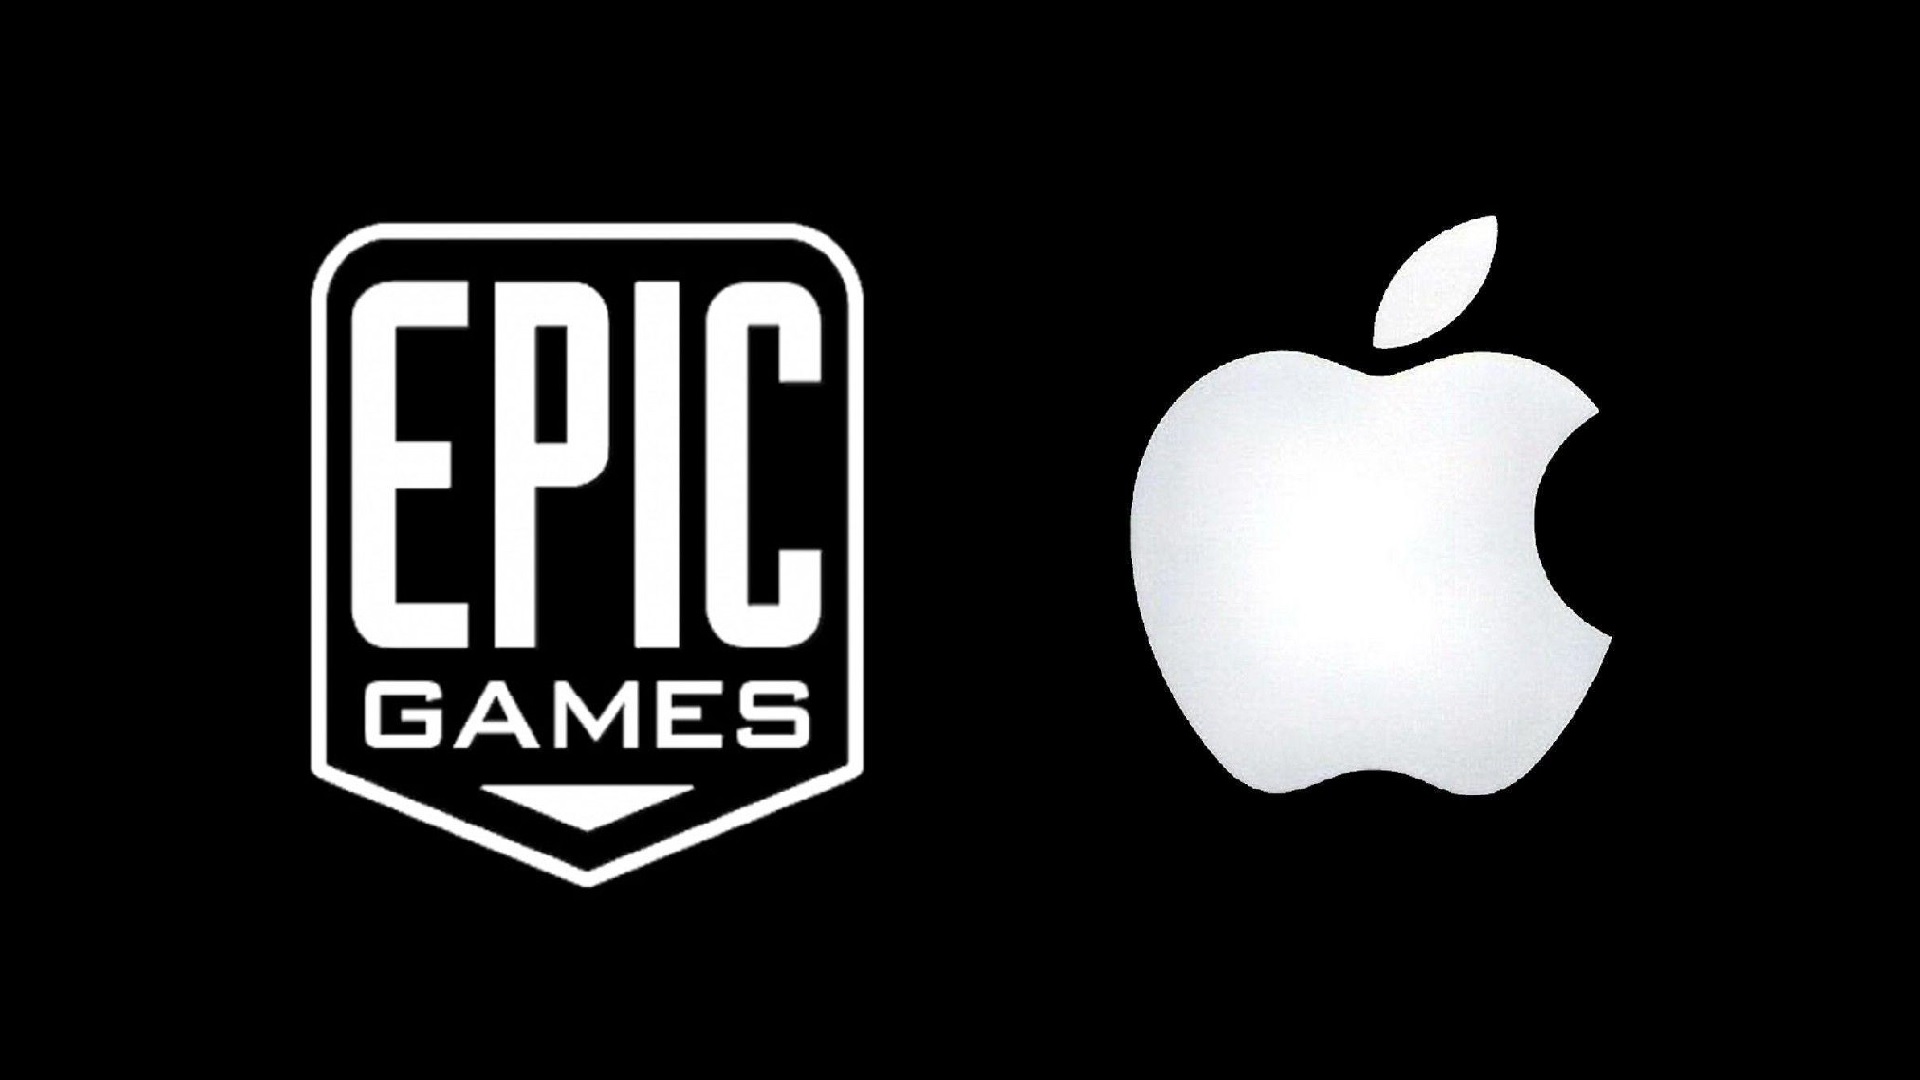 What Is Going On With Epic Games And Apple?